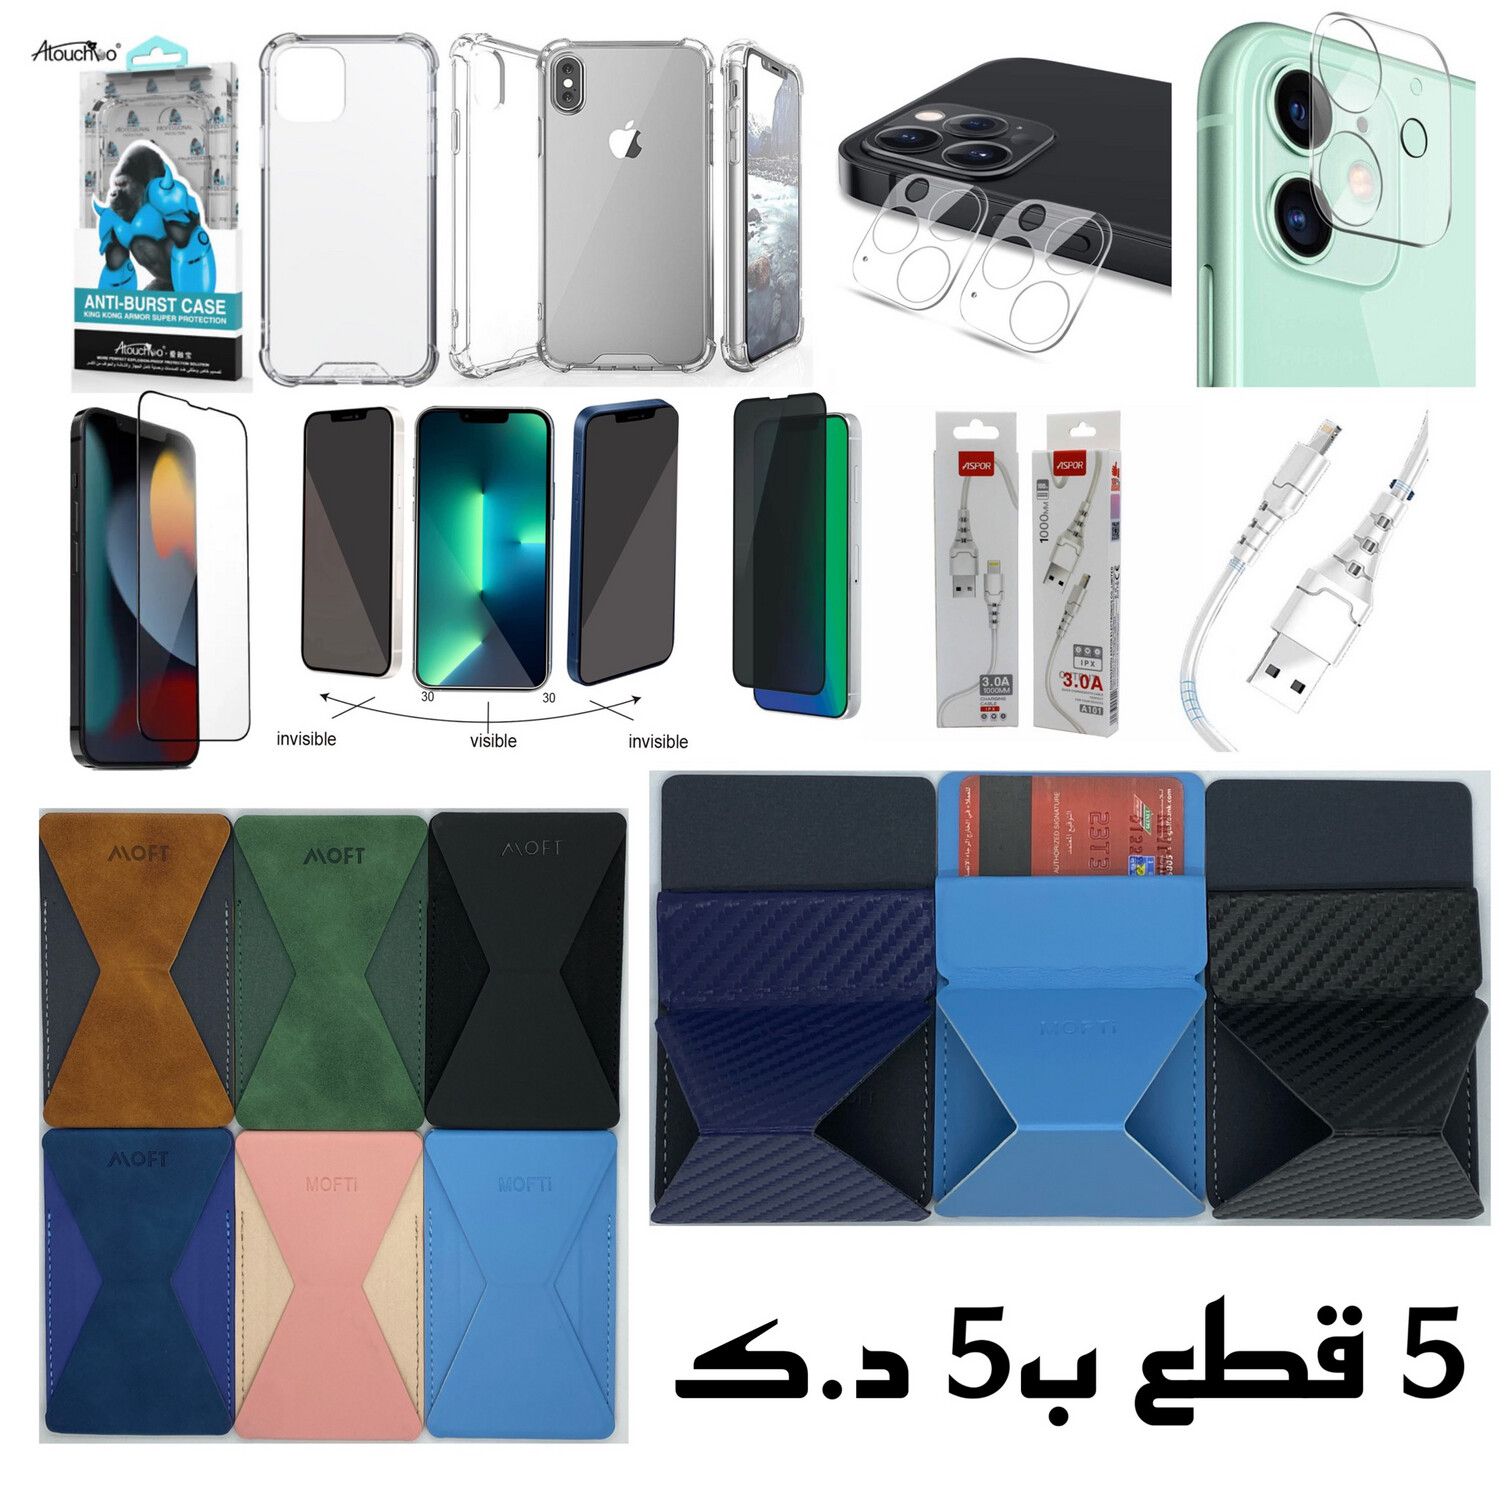 Offer your phone shine 5 pieces with 5 full protection